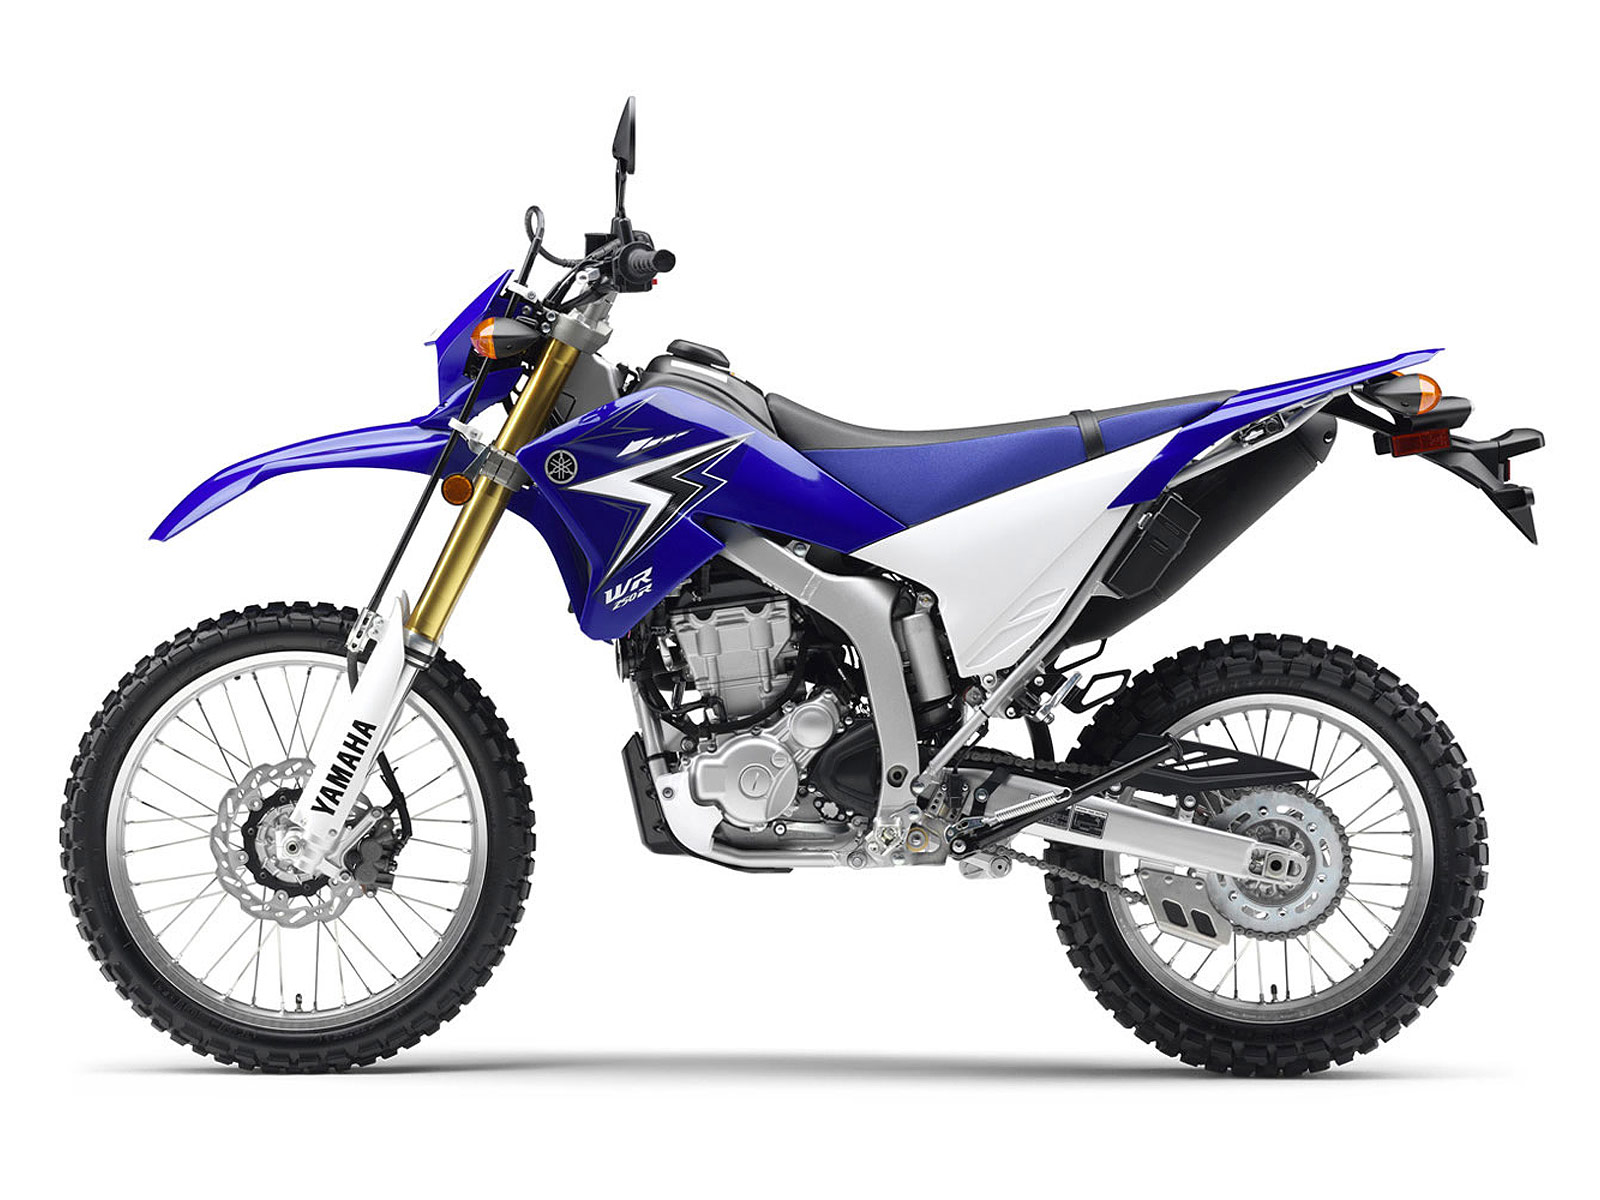 YAMAHA pictures 2010 WR250R specifications